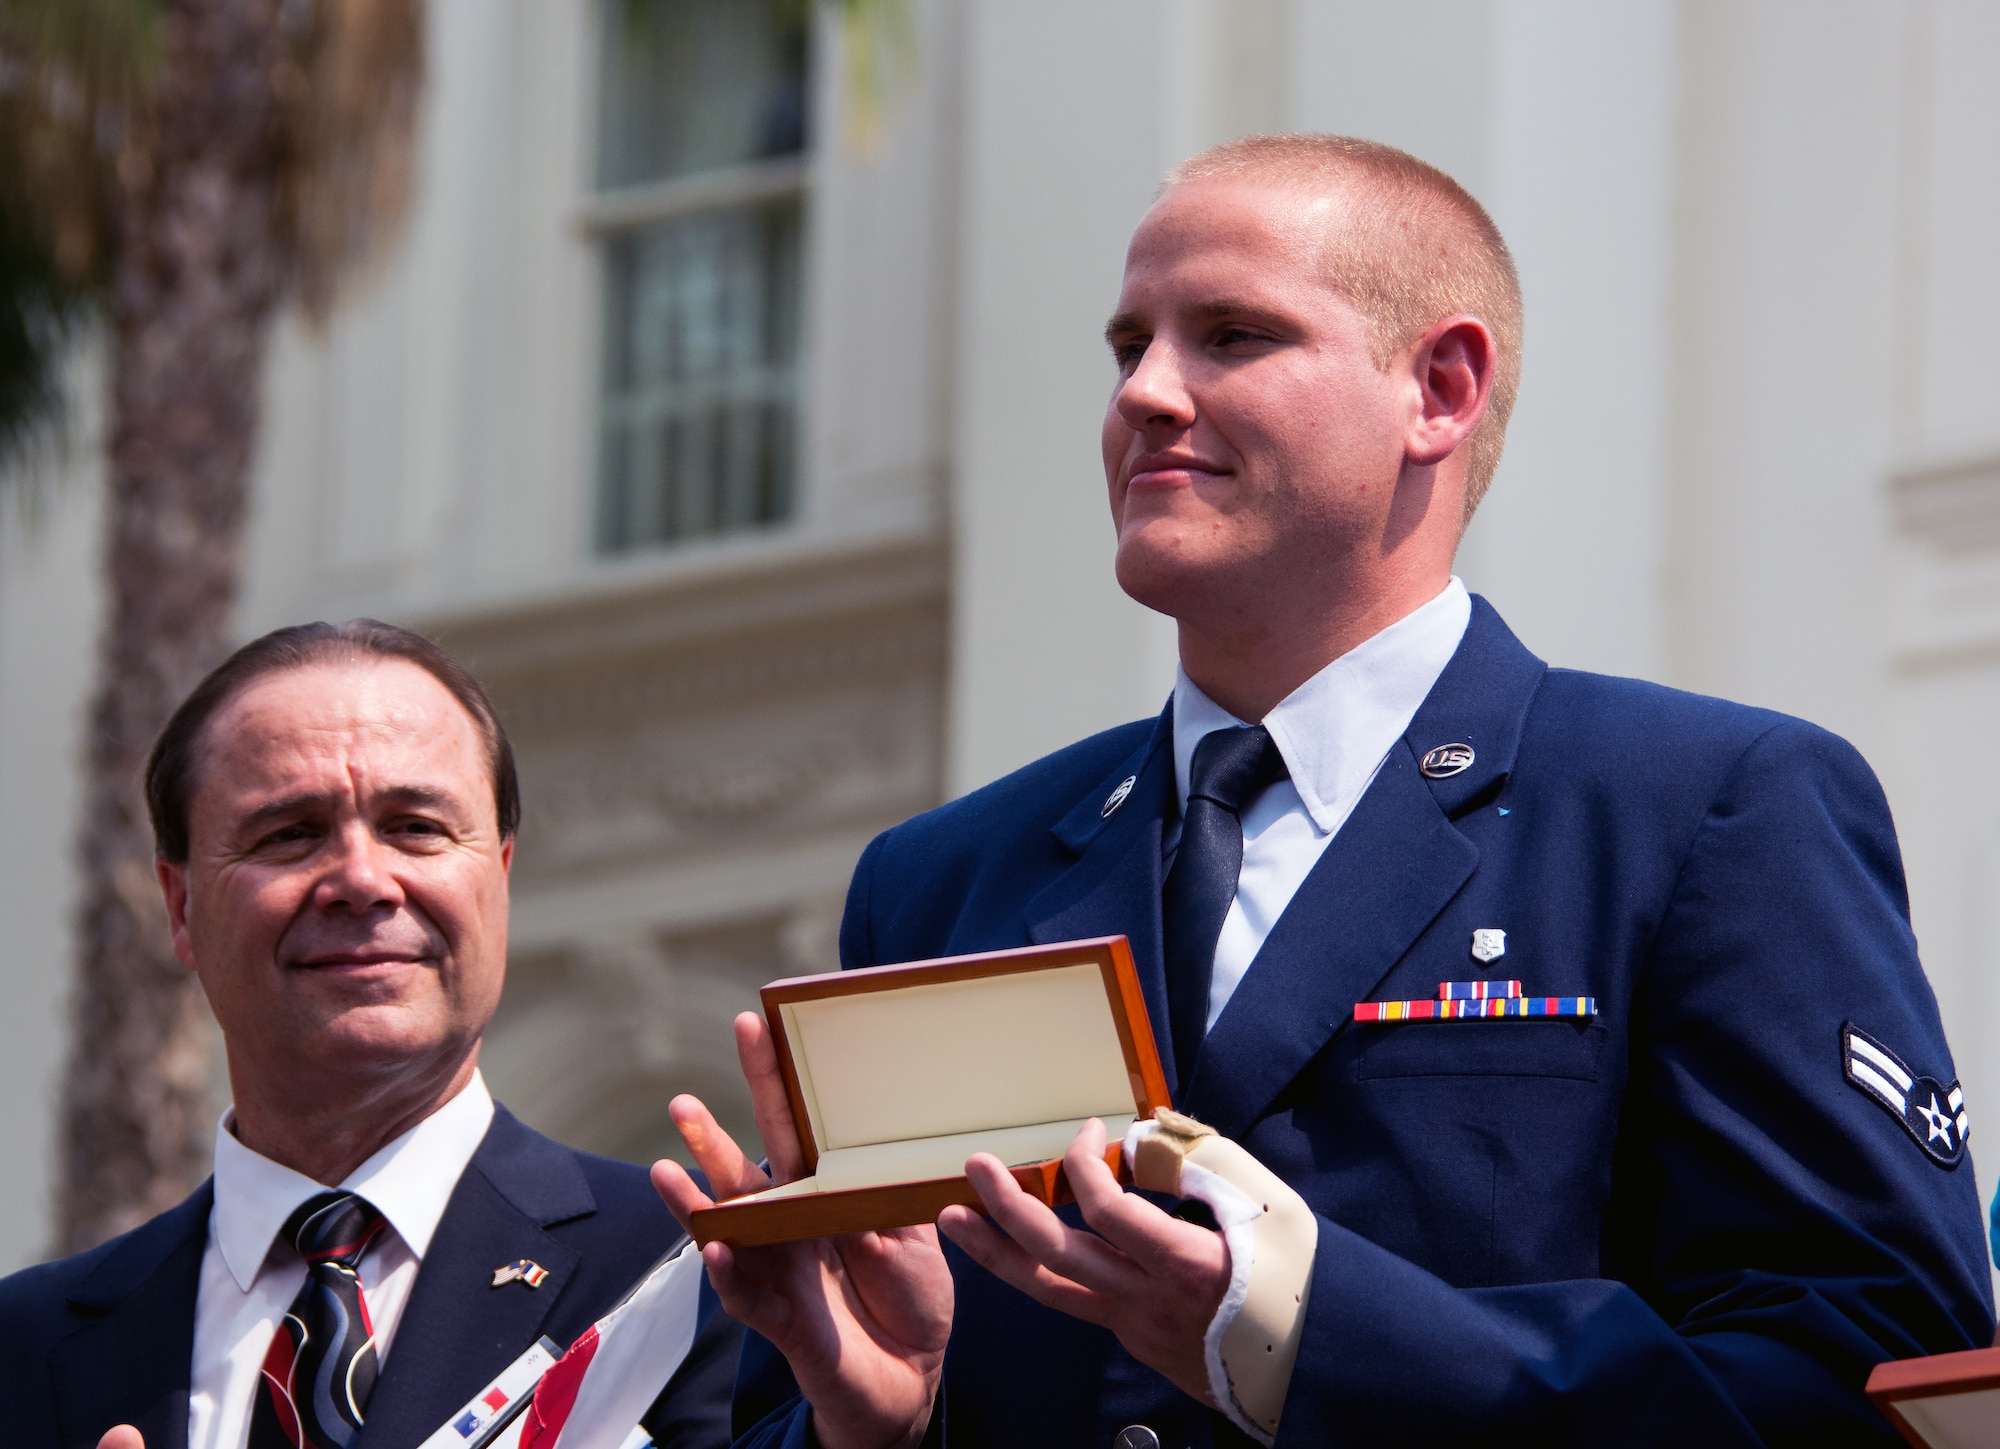 Airman 1st Class Spencer Stone receives a ceremonial key to the city from Mayor Kevin Johnson during the Sacramento Hometown Heroes Parade and festivities in Sacramento, California, Sept. 11, 2015. (U.S. Air Force photo/Senior Airman Charles Rivezzo)